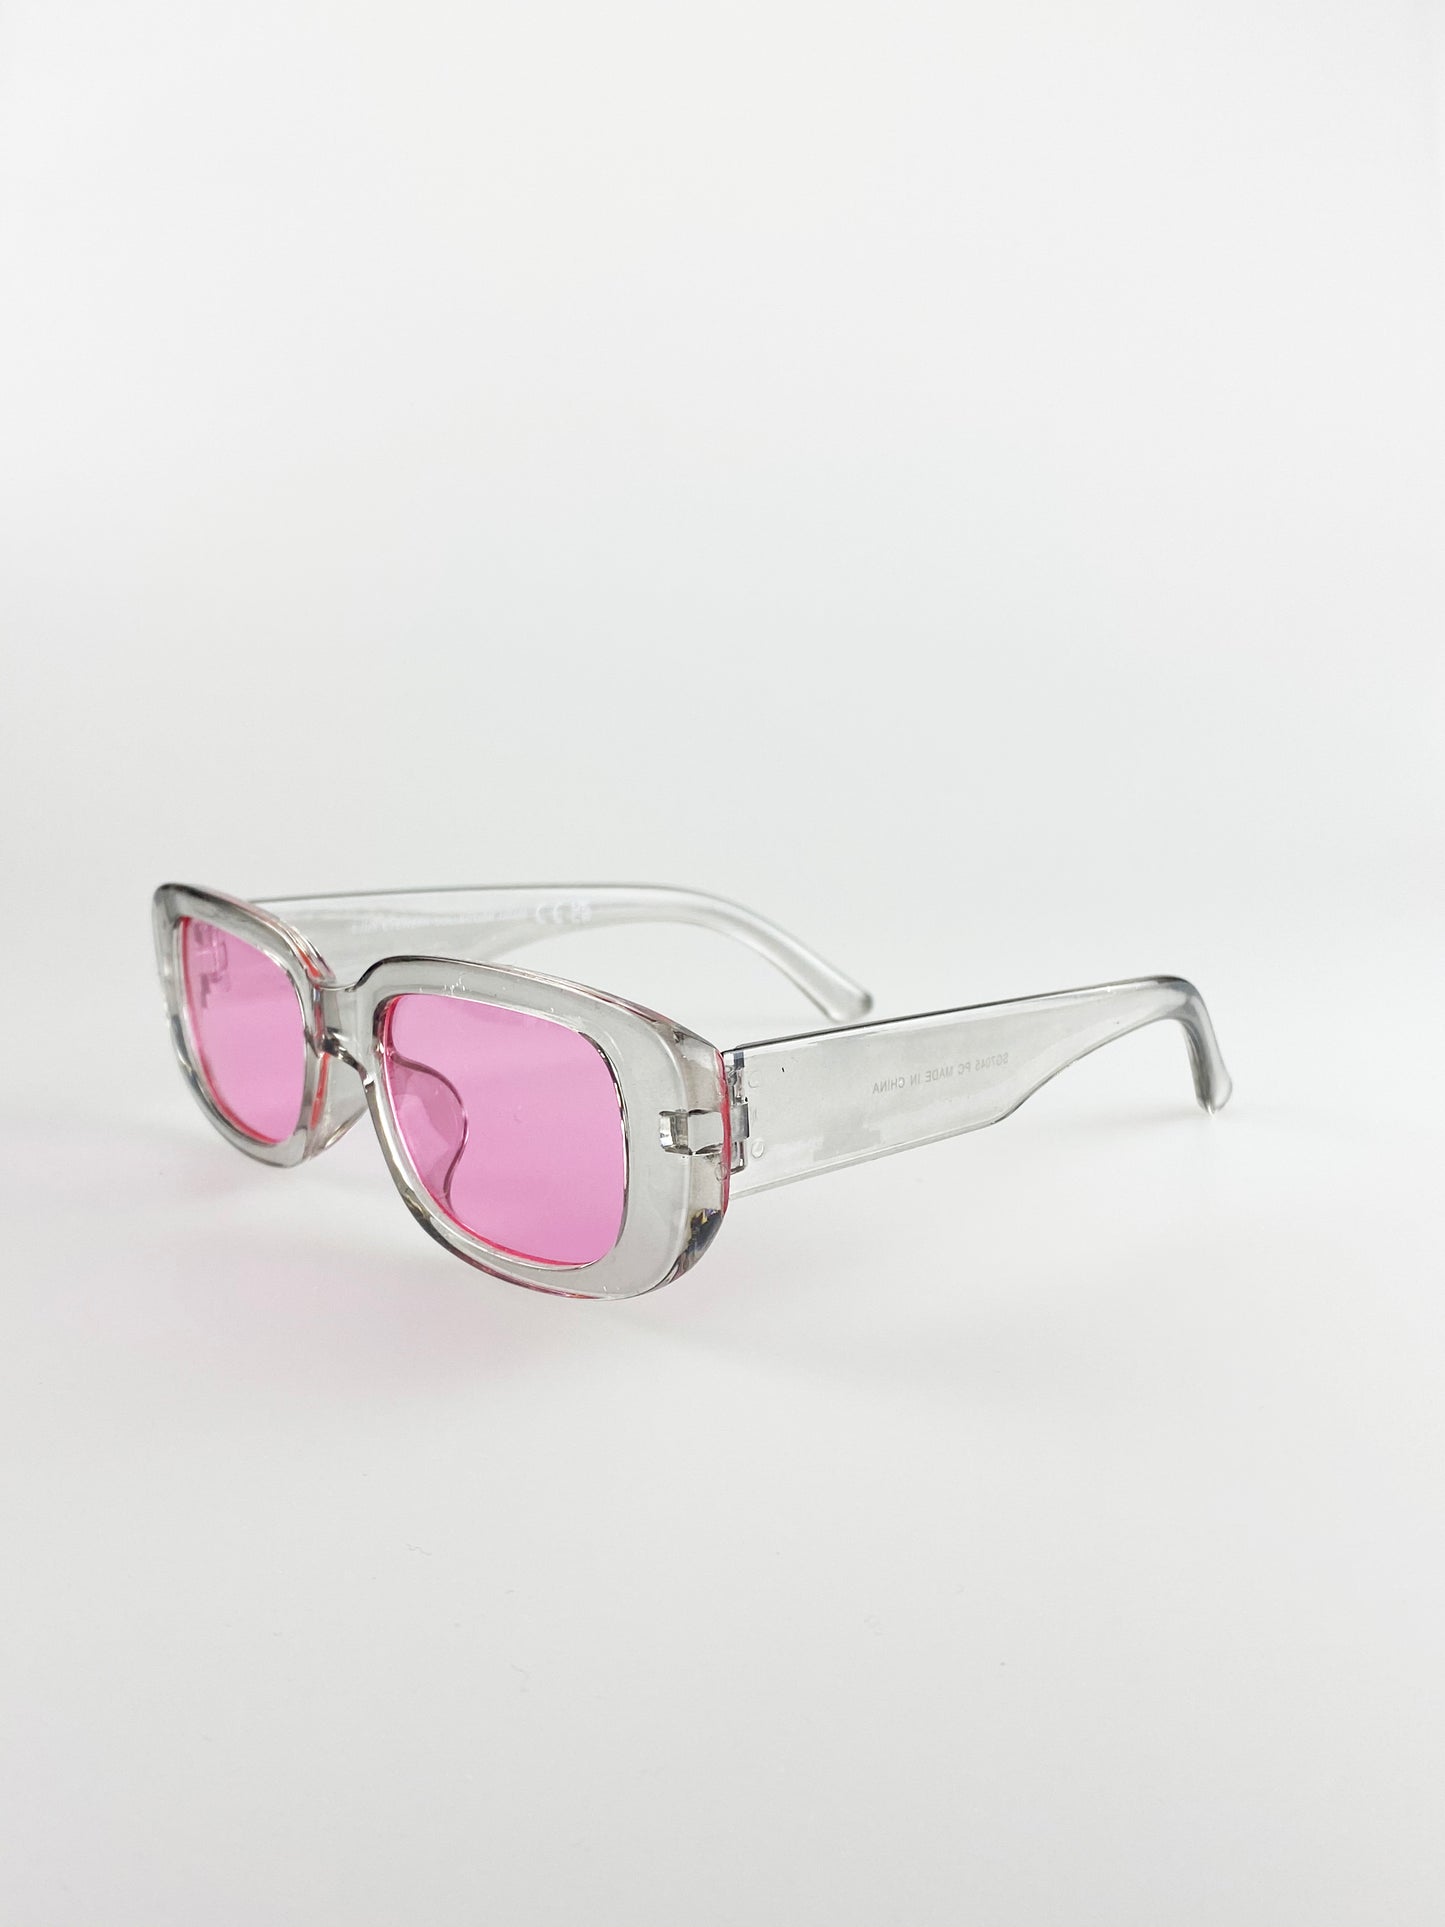 Retro Rectangle Sunglasses With Pink Lenses and Light Gray Frame